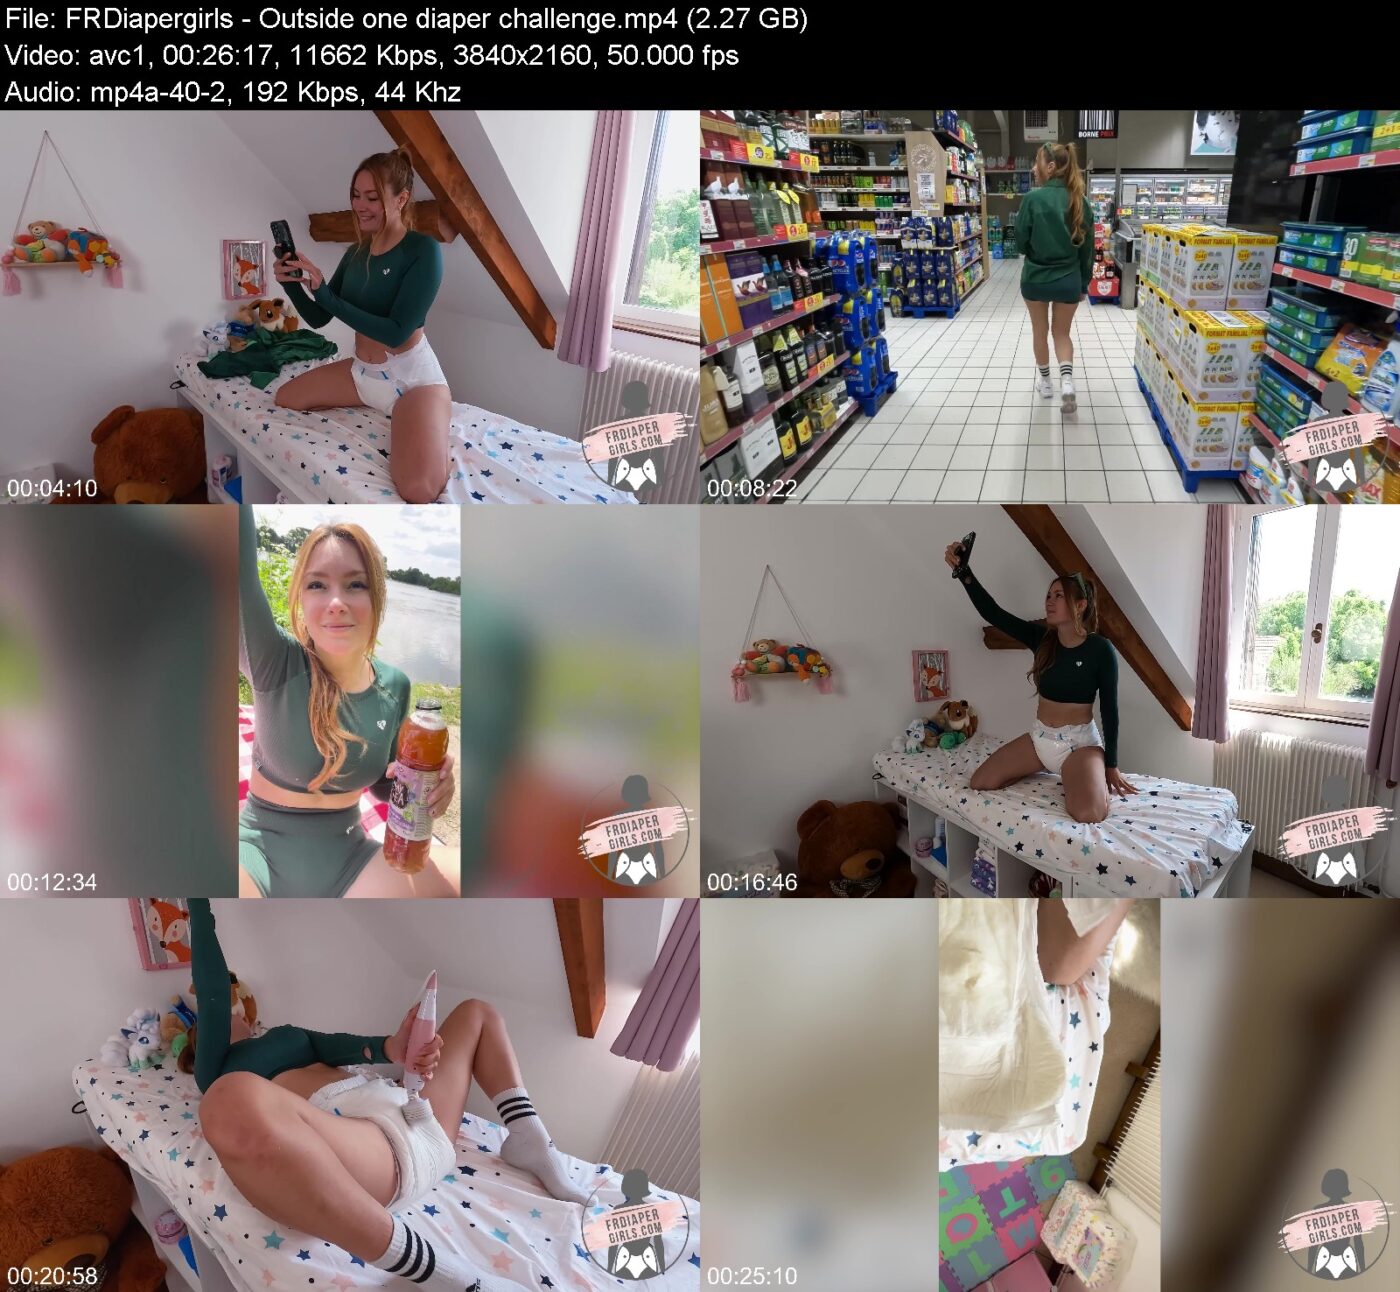 Actress: FRDiapergirls. Title and Studio: Outside one diaper challenge